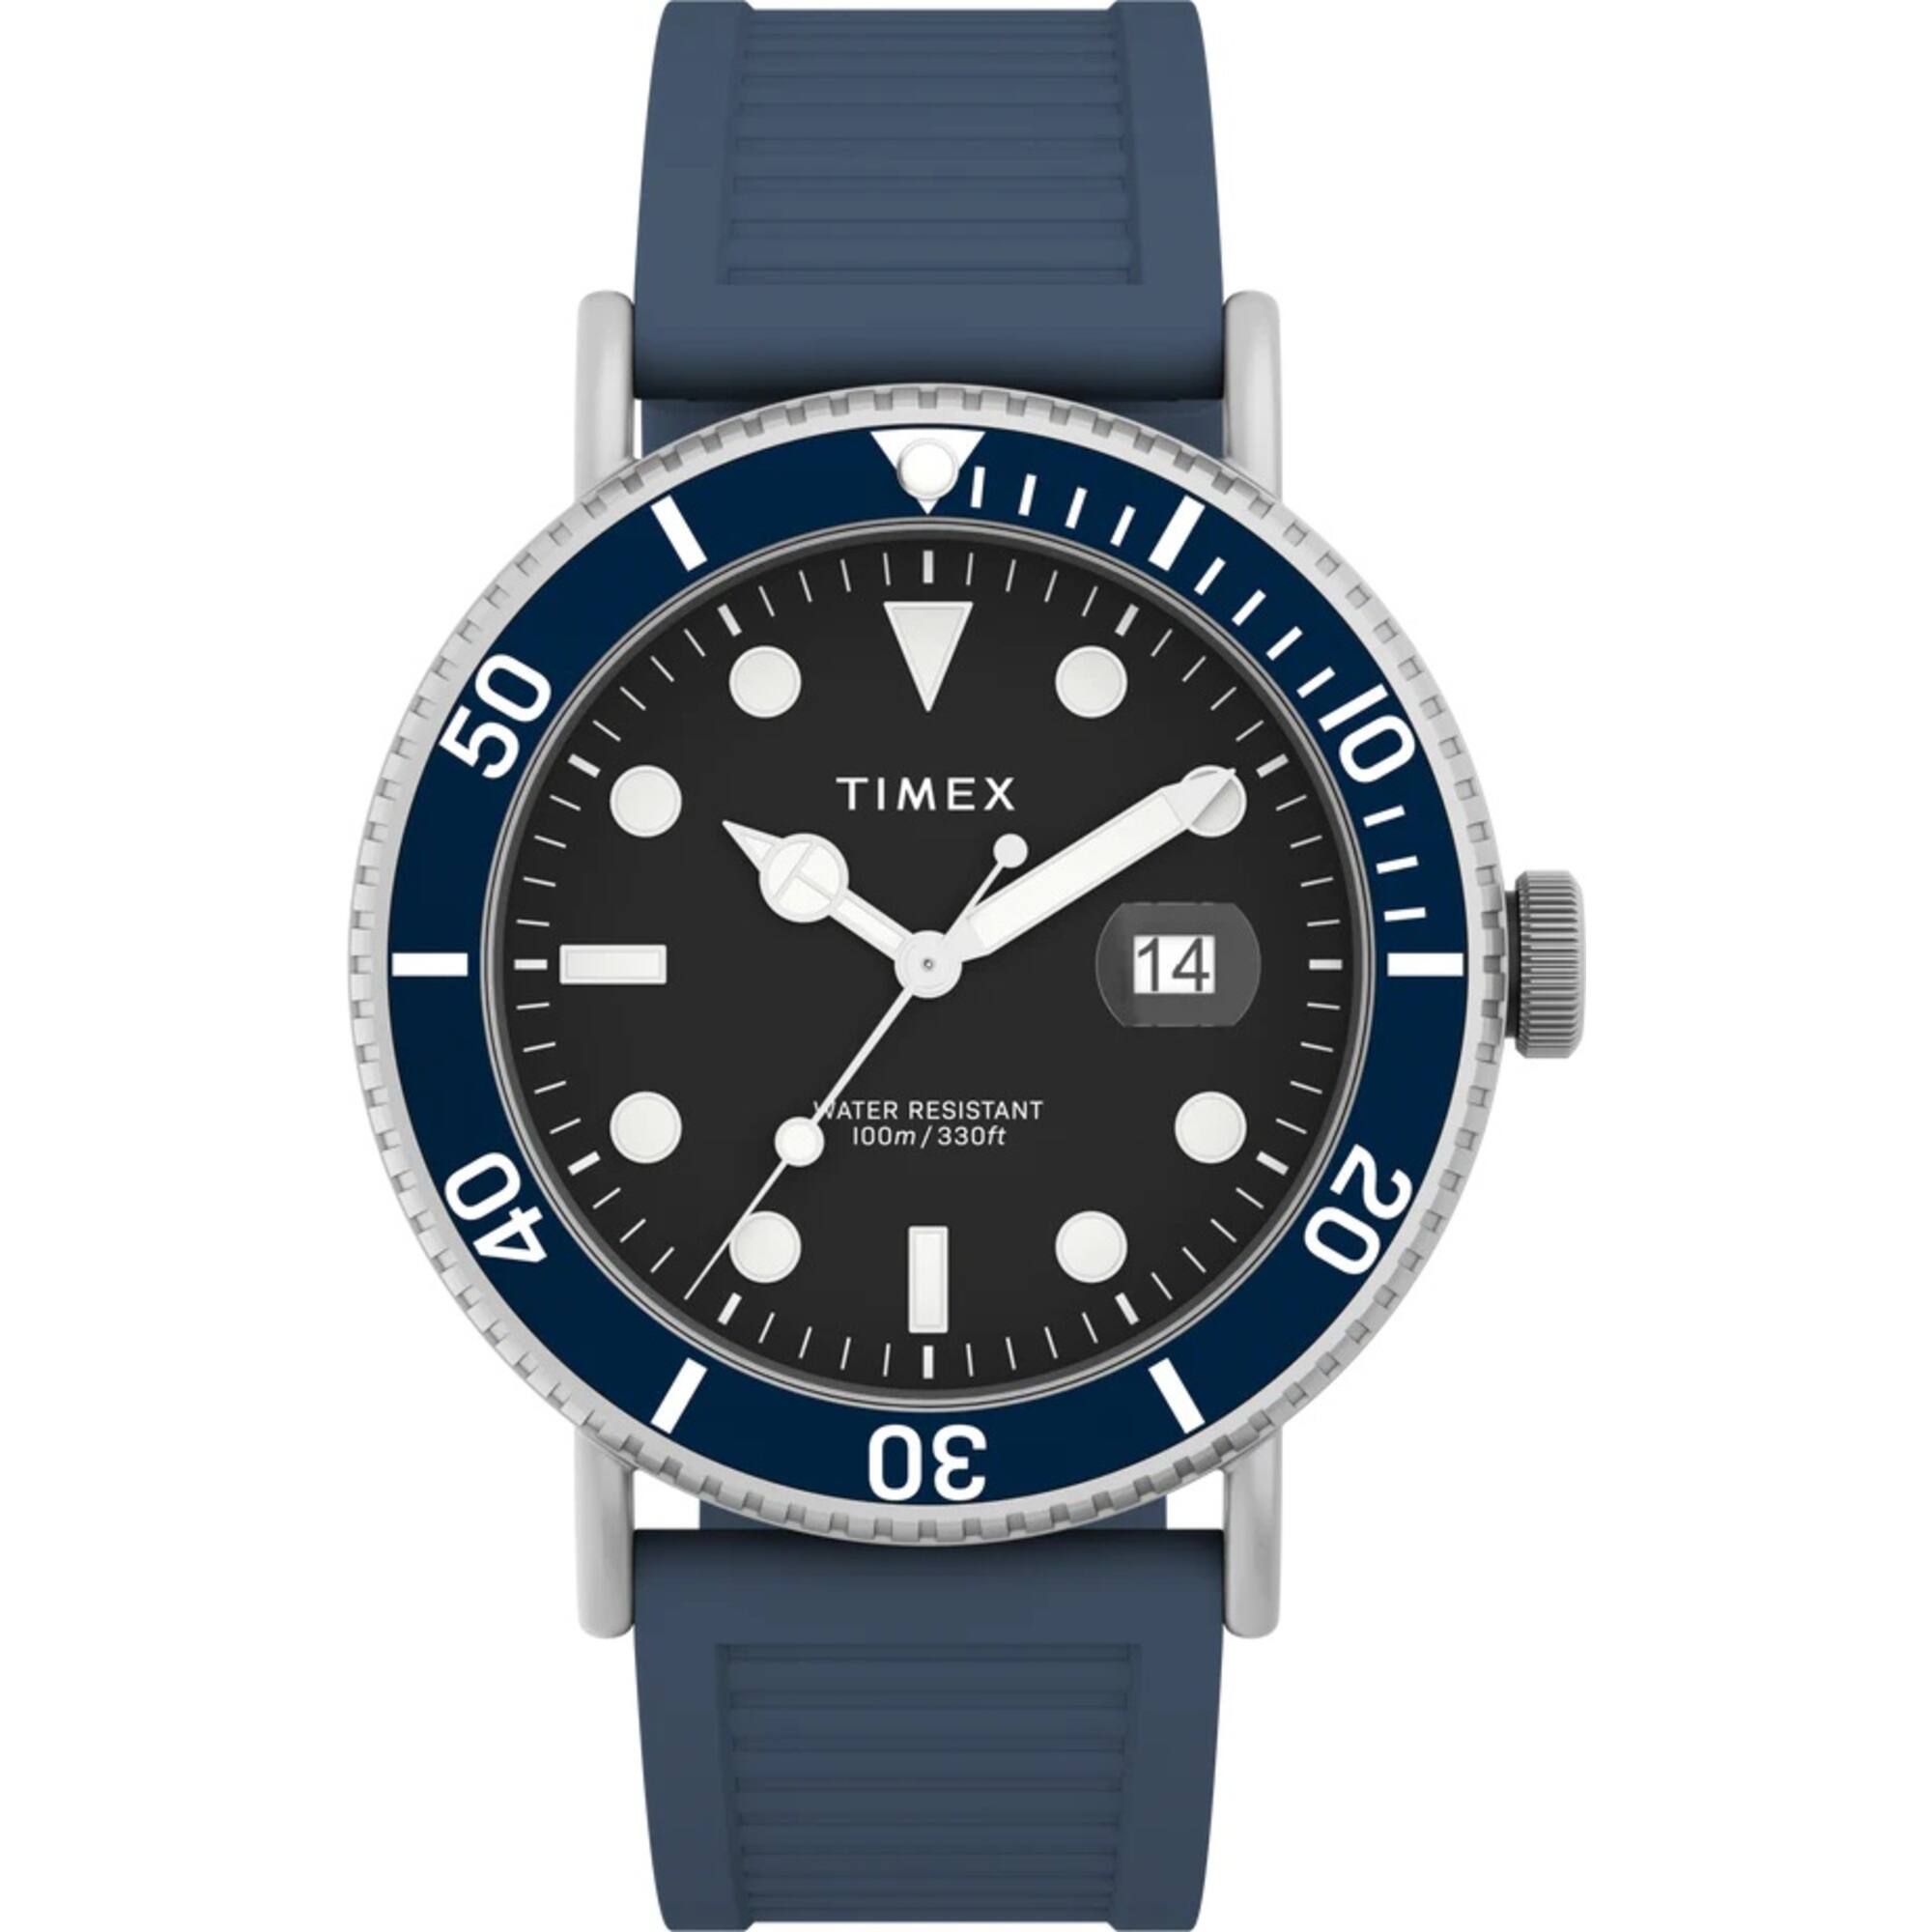 Timex Men’s Watch Portside Rotating Bezel Black Dial Blue Resin Strap TW2W16600 for $54.00 and Free Shipping